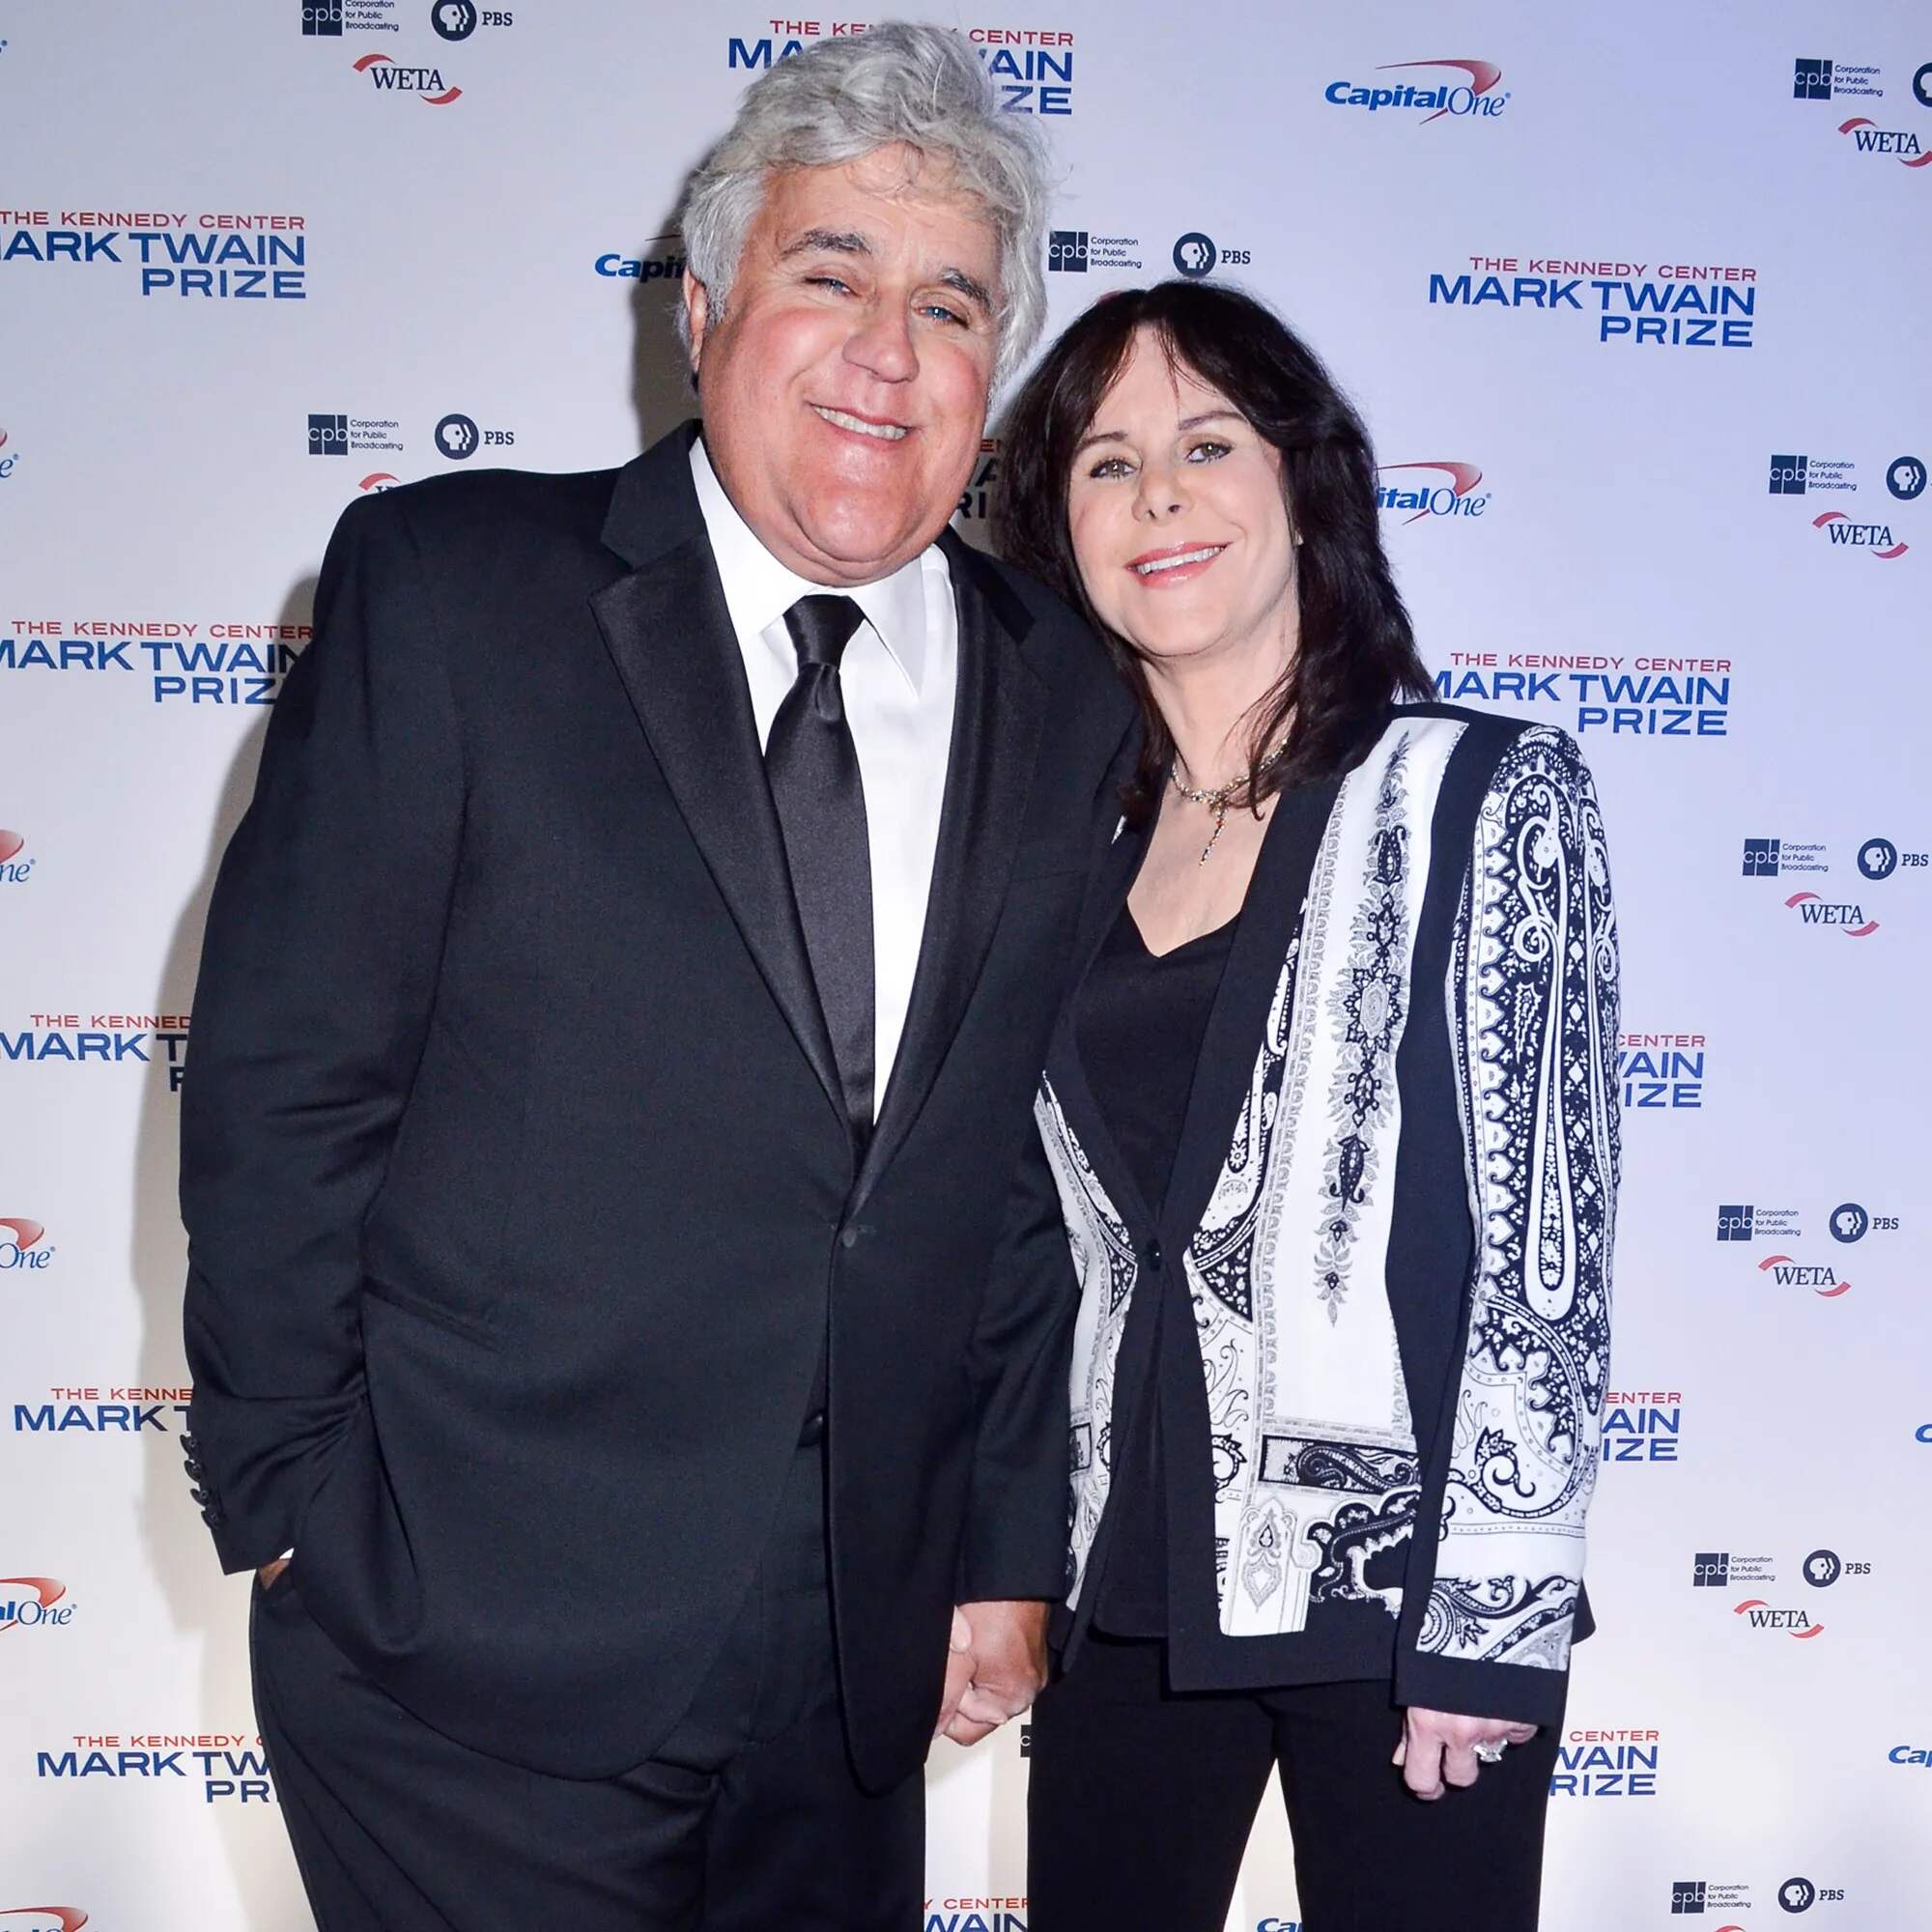 Jay Leno Defies Stigma By Bringing Wife To Comedy Gig Amid Conservatorship Filing